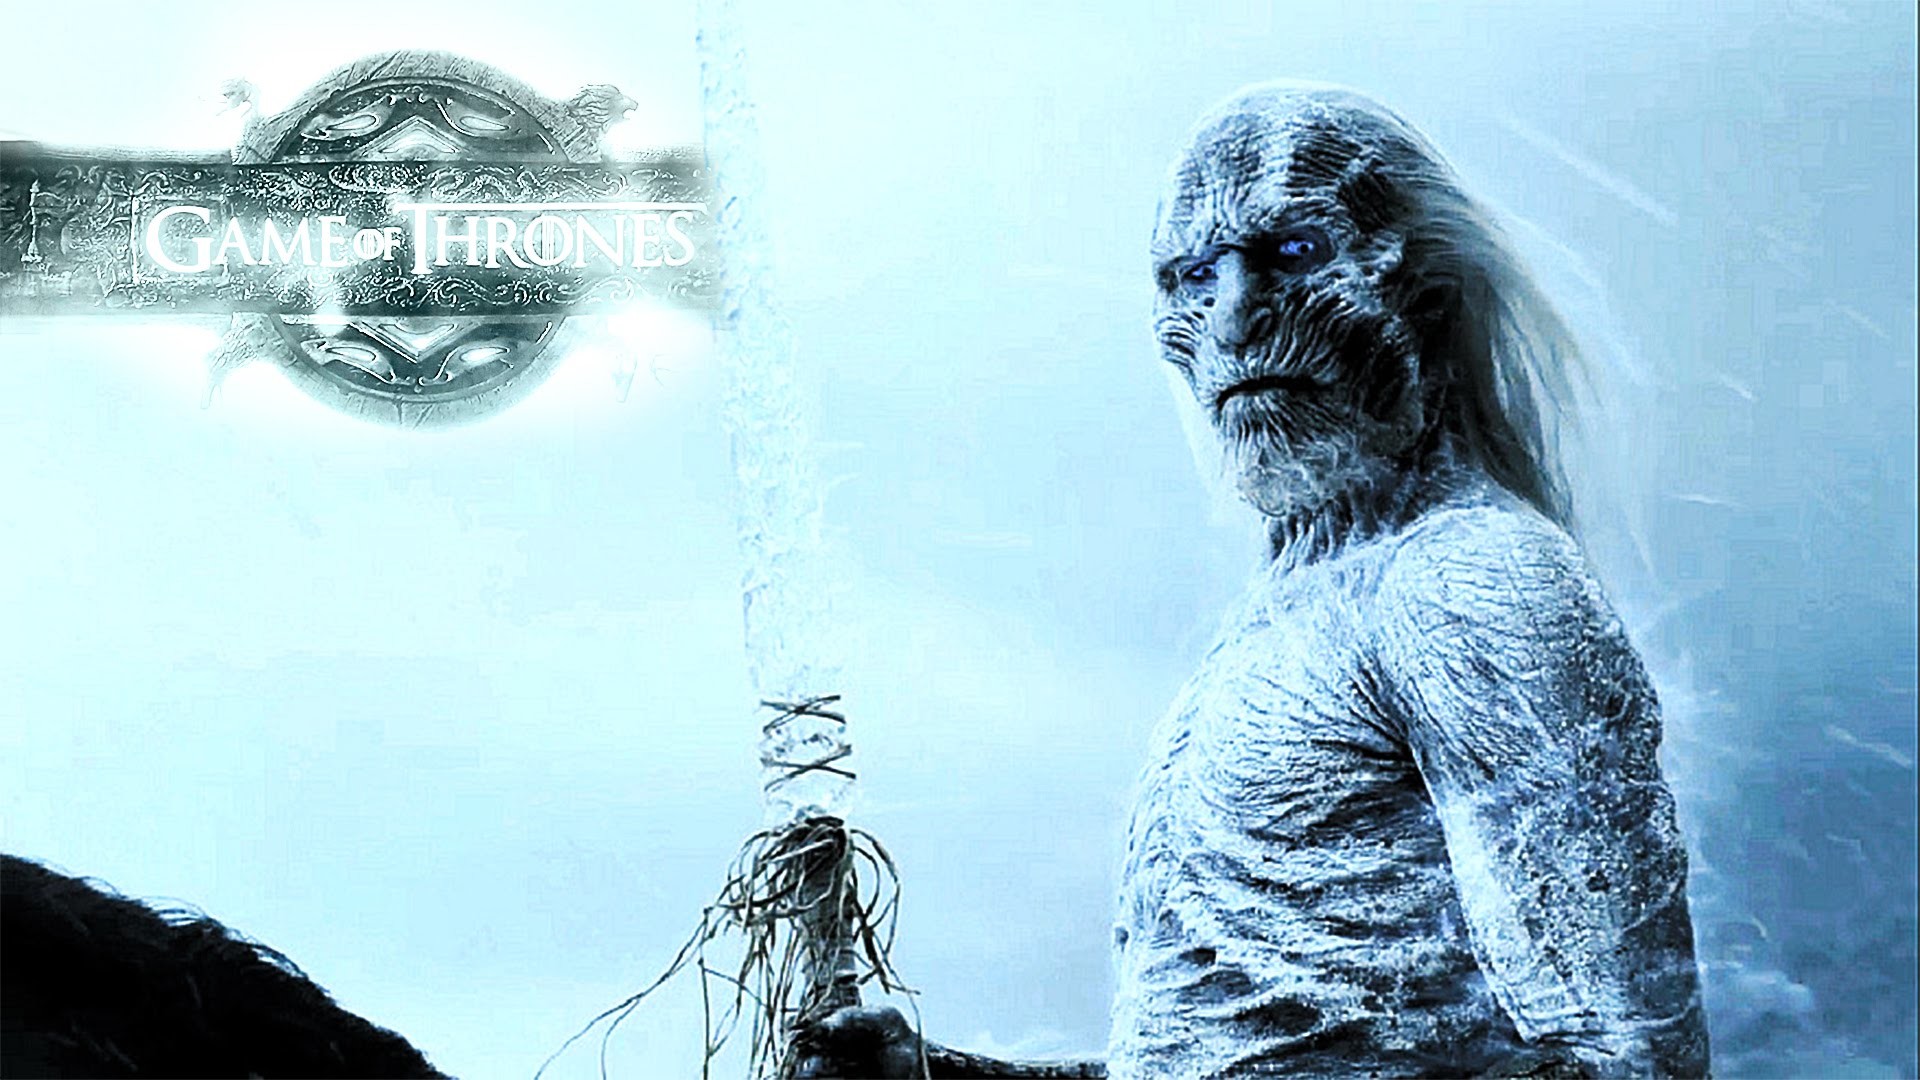 1920x1080 Games of Thrones - White Walkers